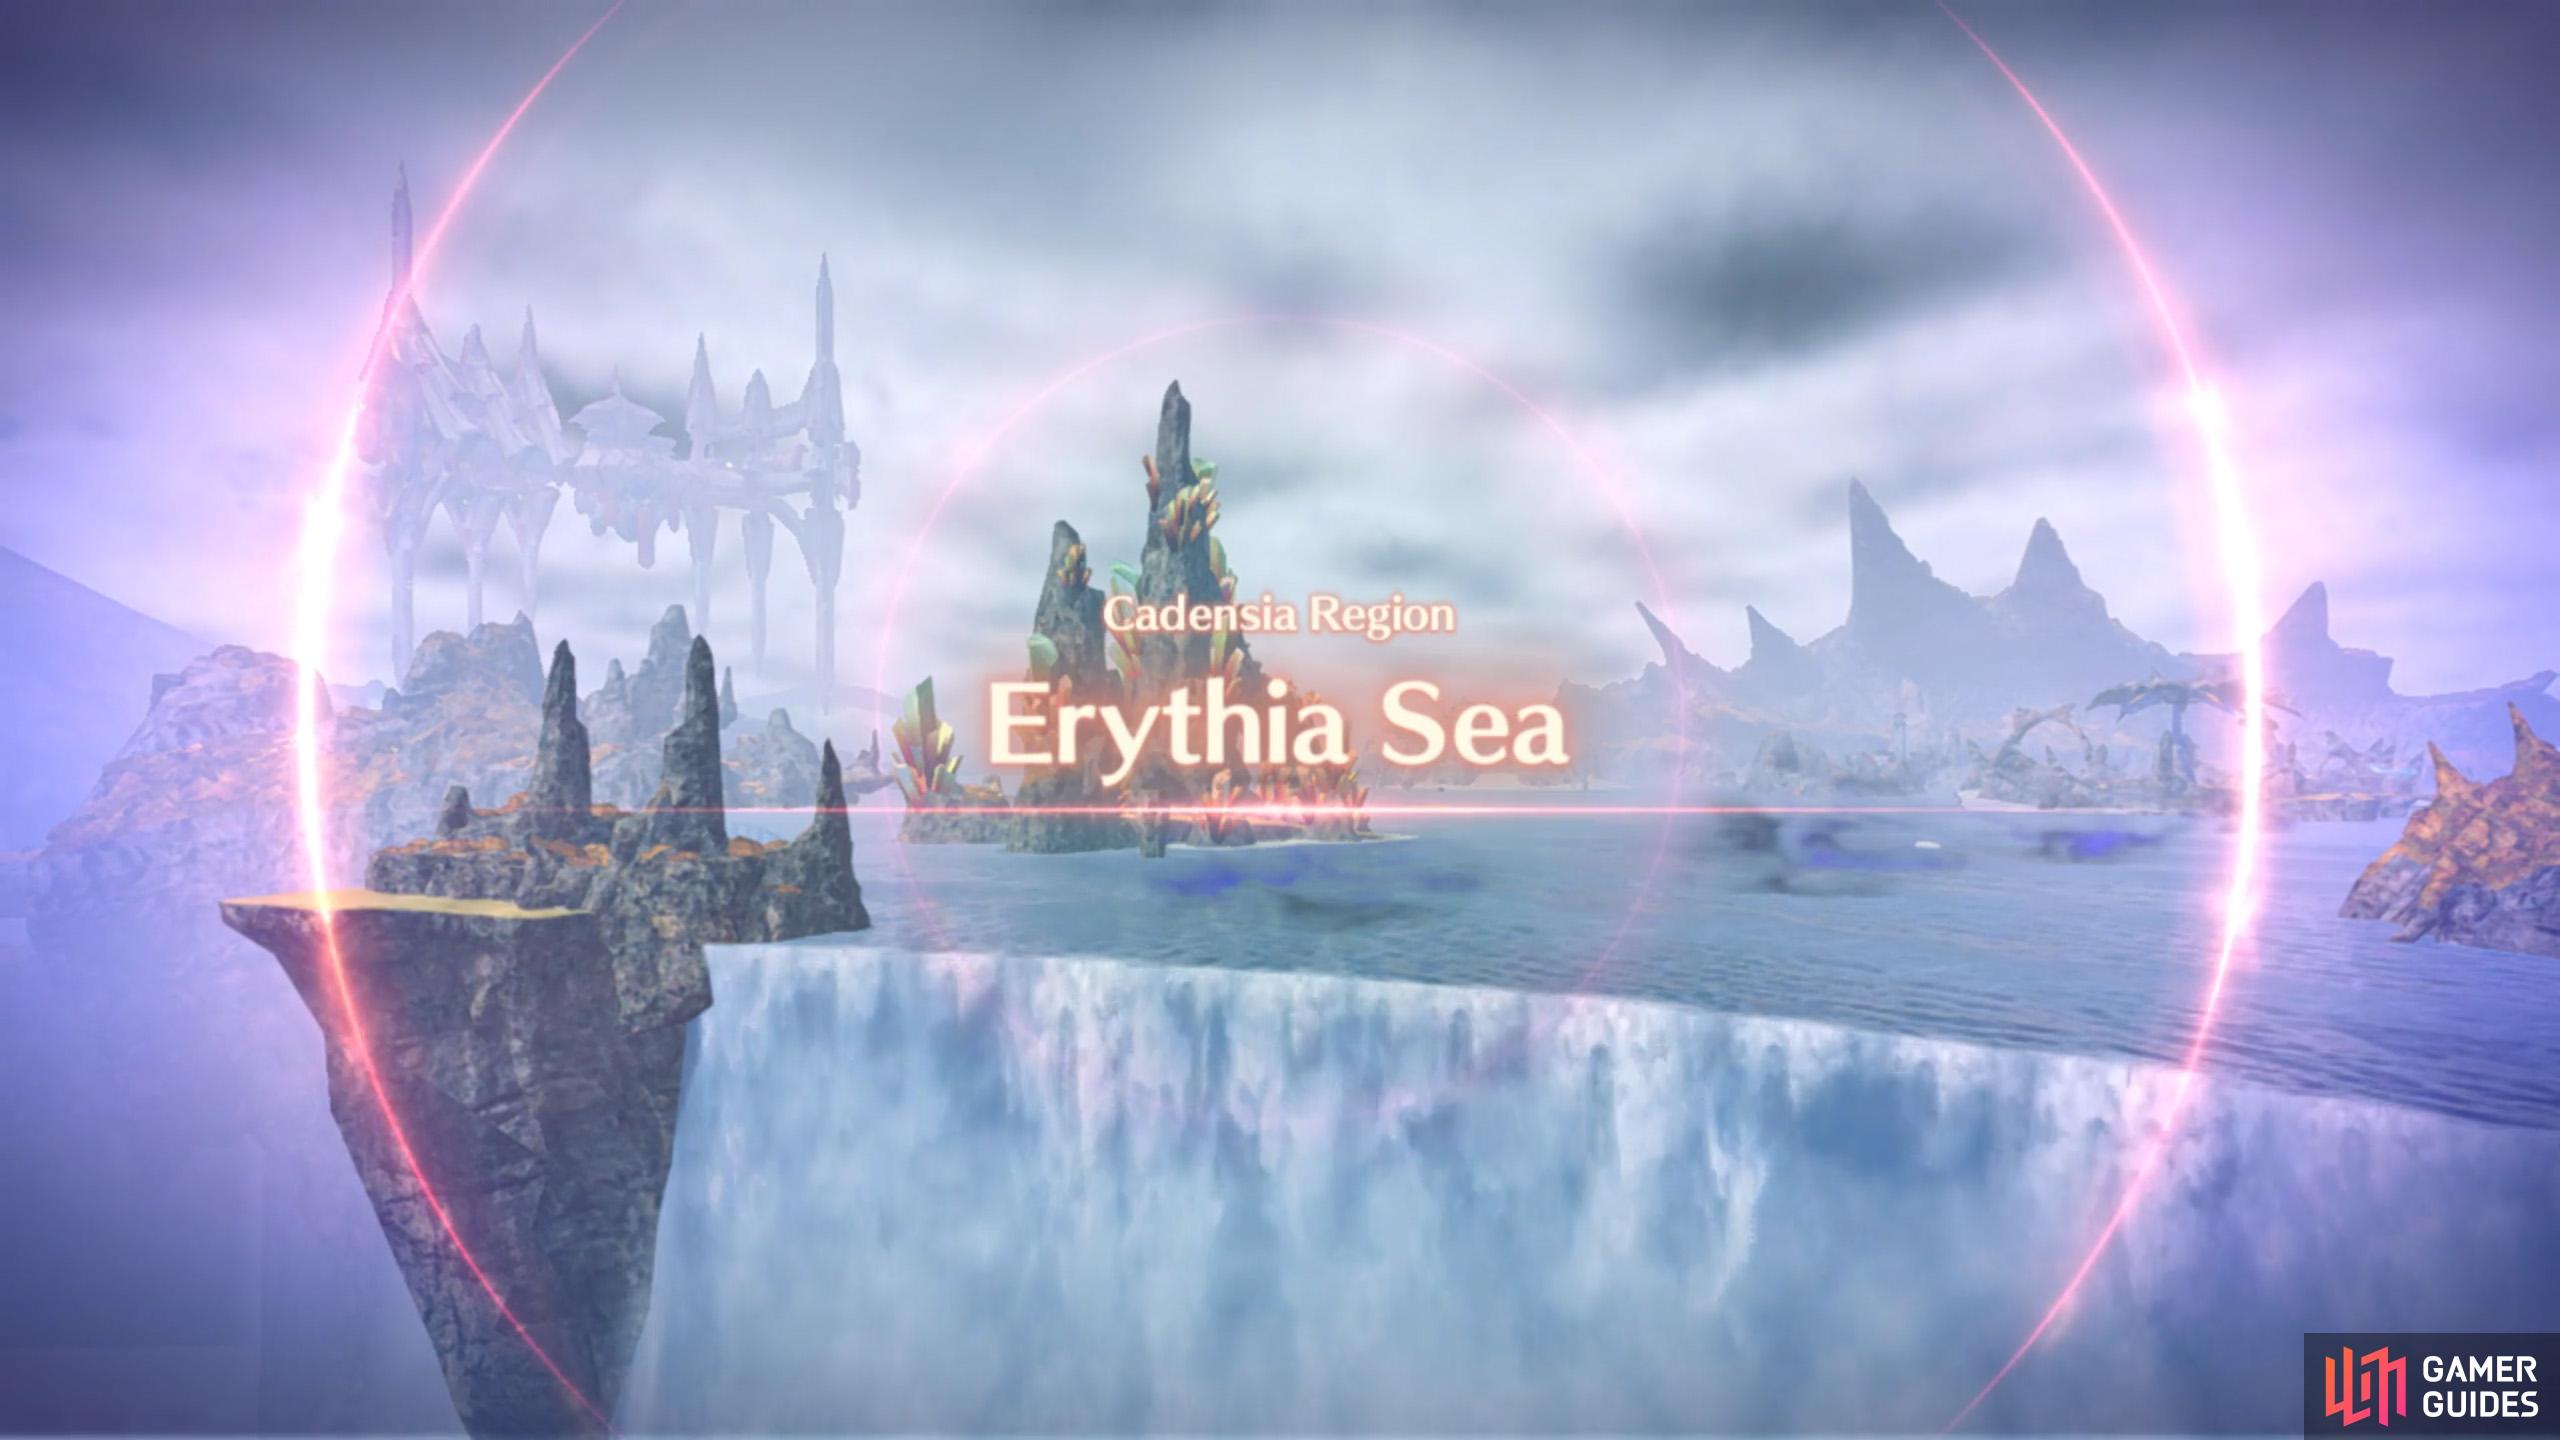 Erythia Sea is vast, but most of it just water.